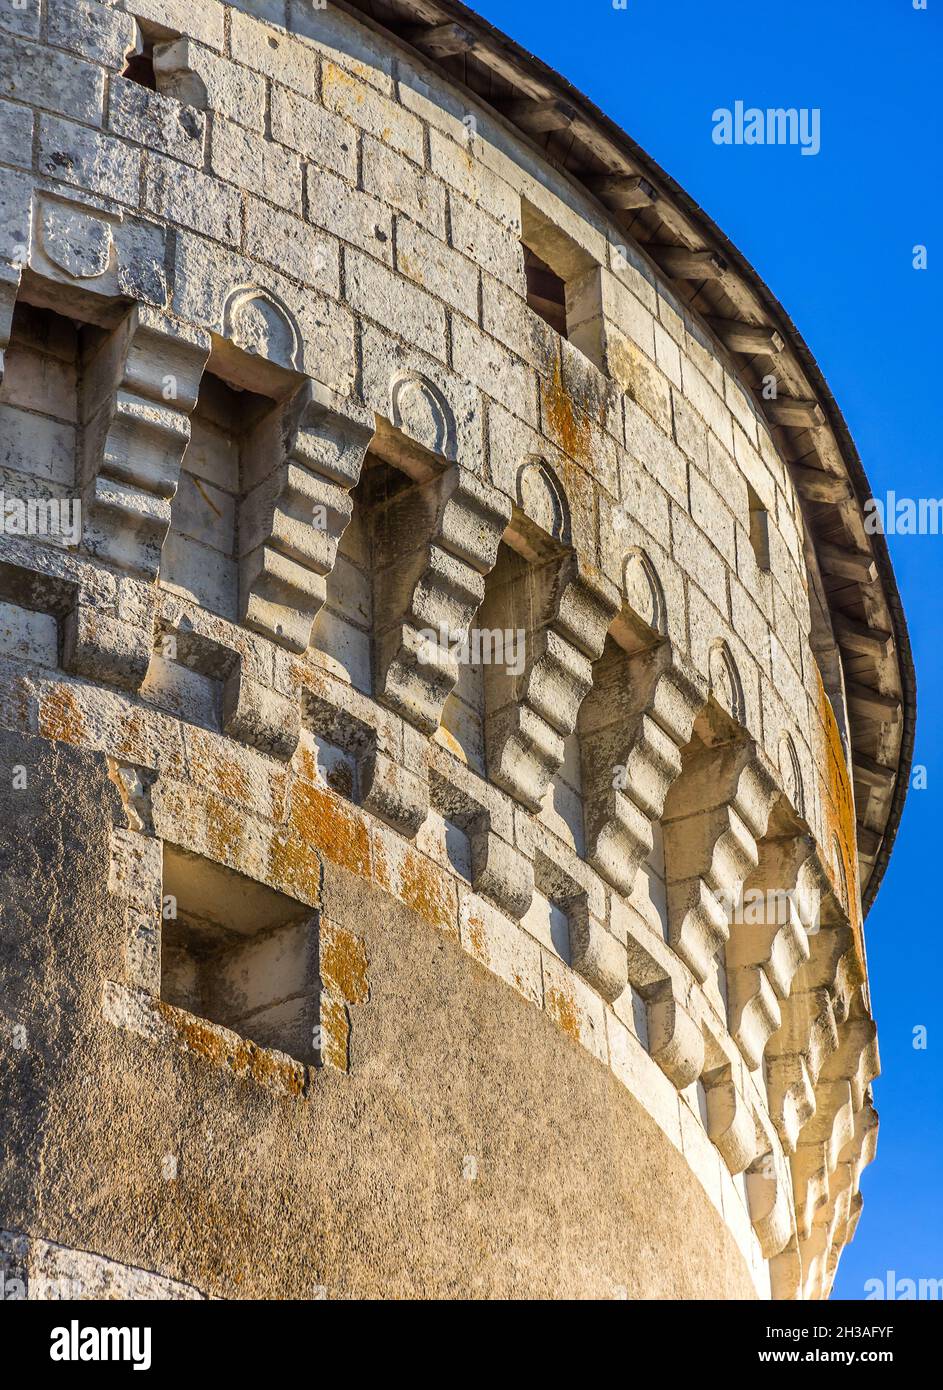 Detail of stonework on tower of the Chateau of Azay-le-Ferron, Indre (36), France. Stock Photo